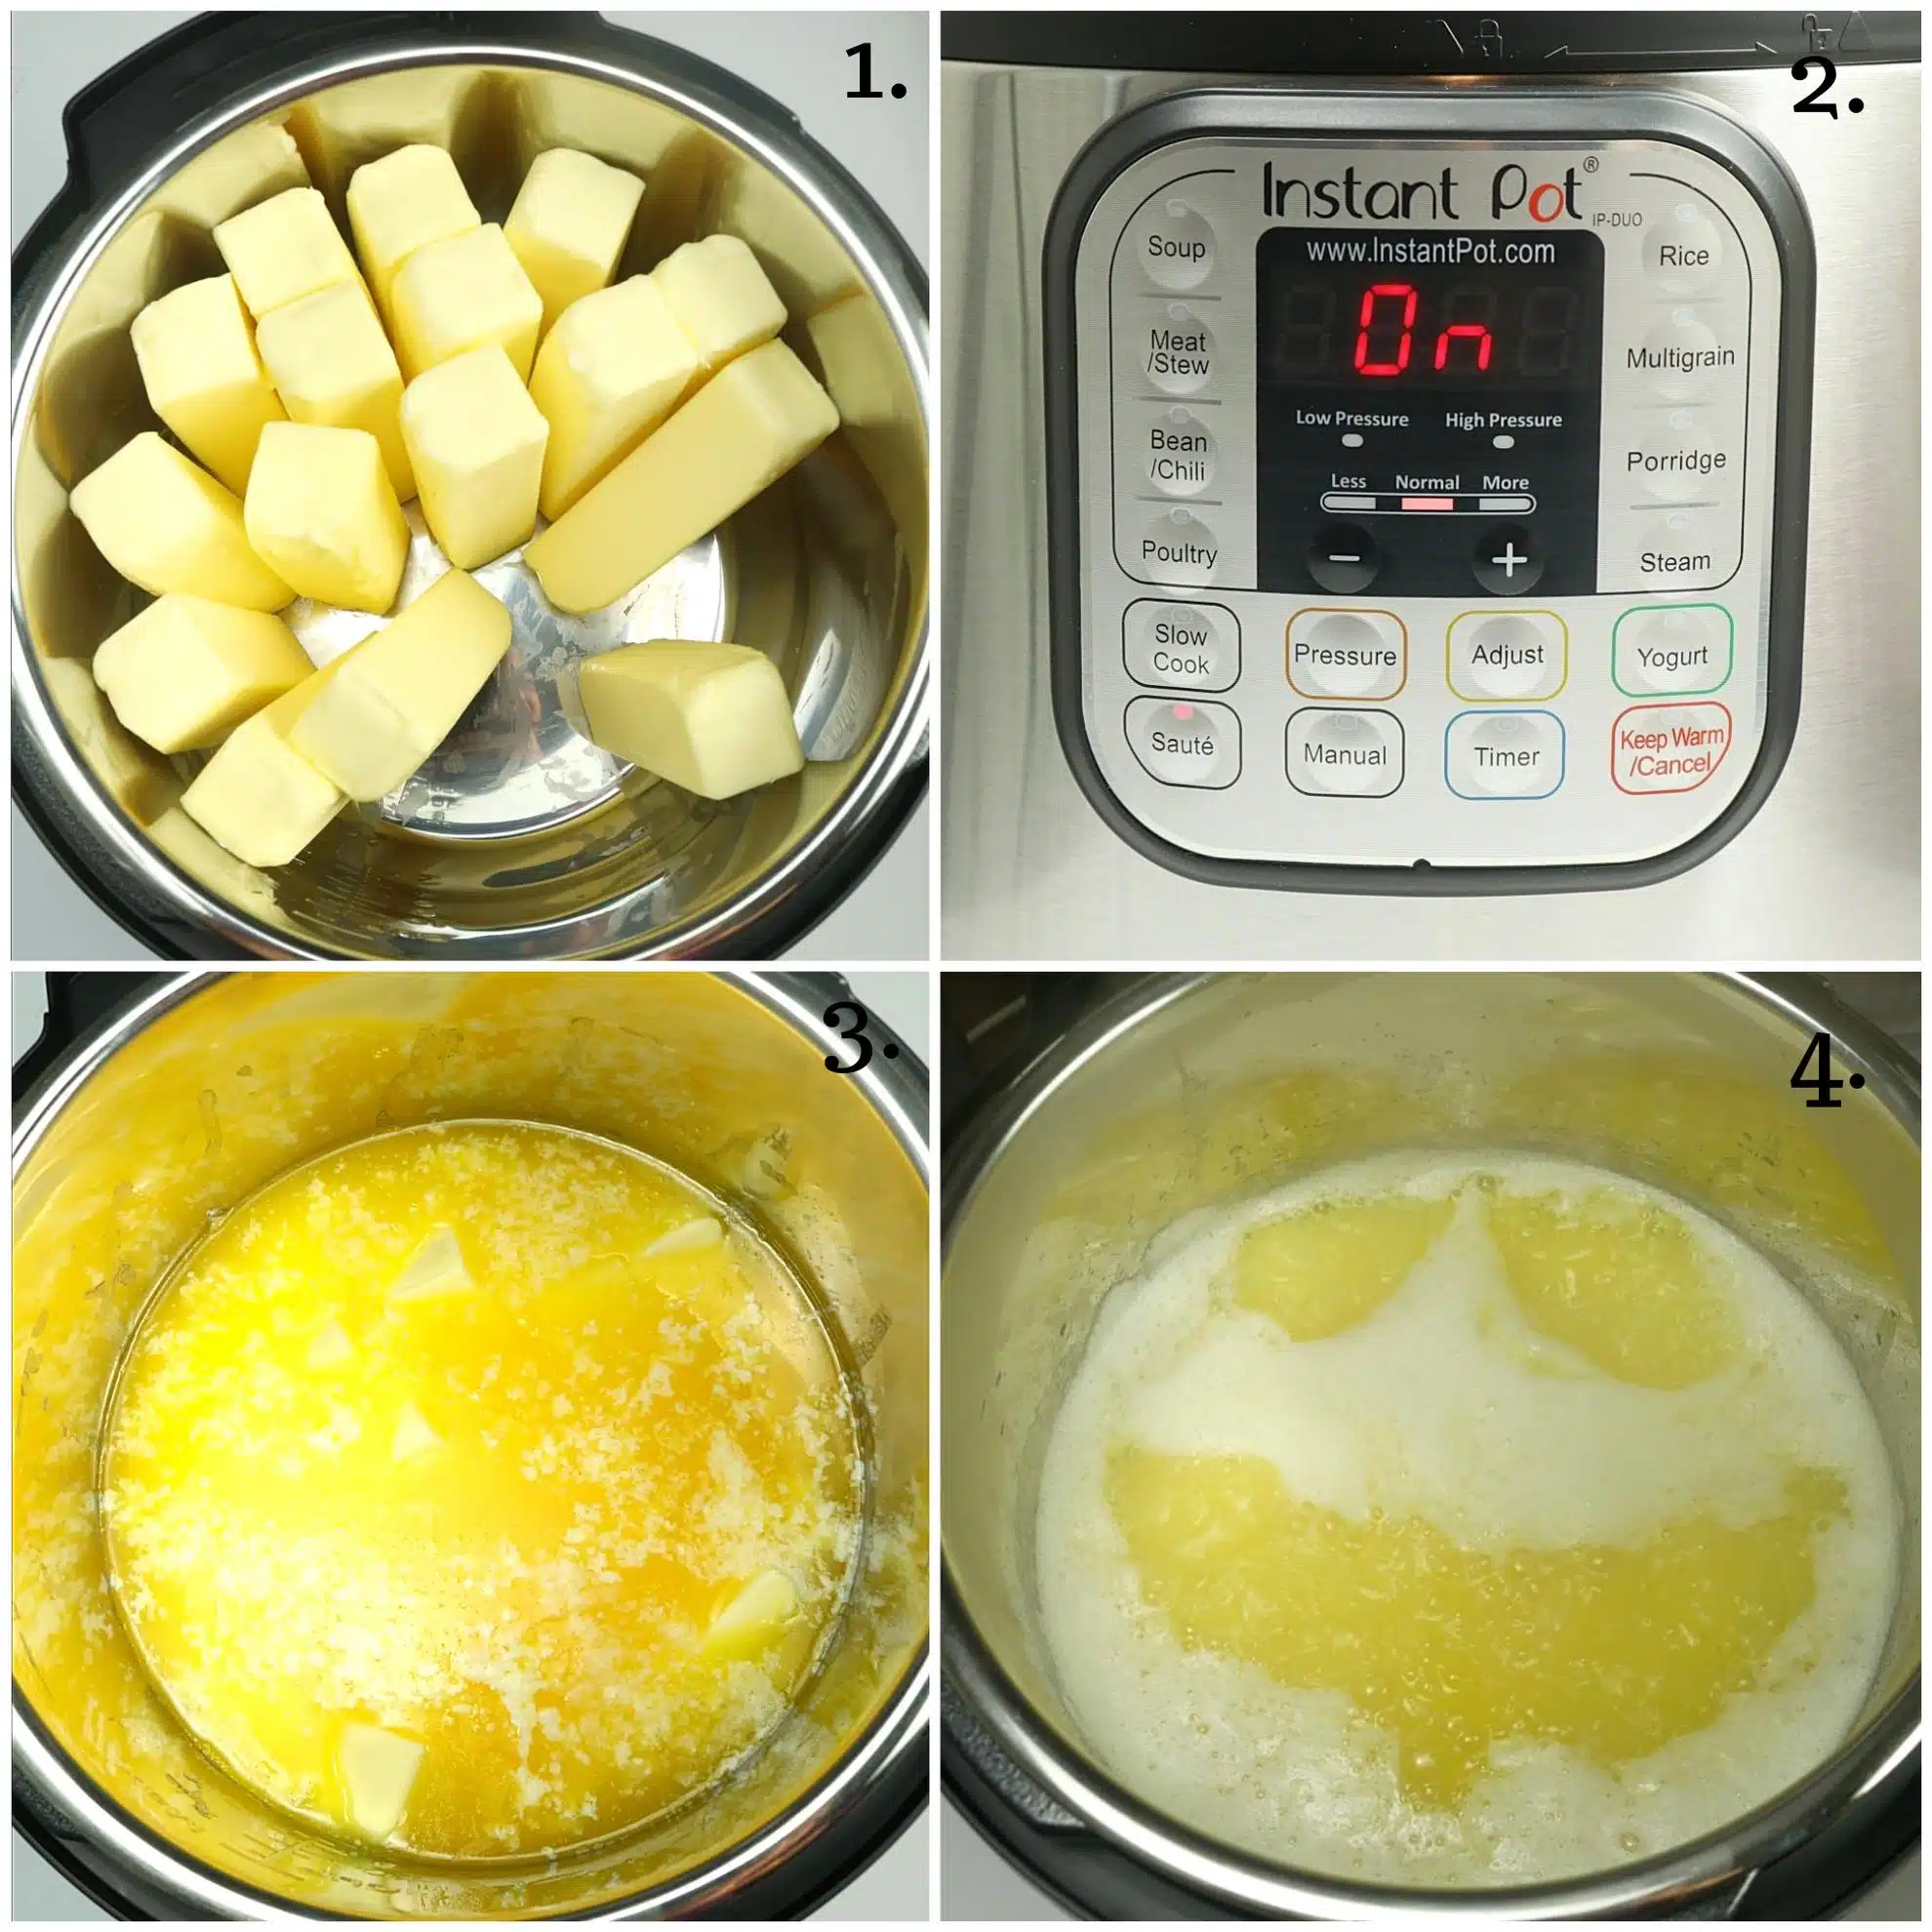 Ghee being cooked in Instant Pot